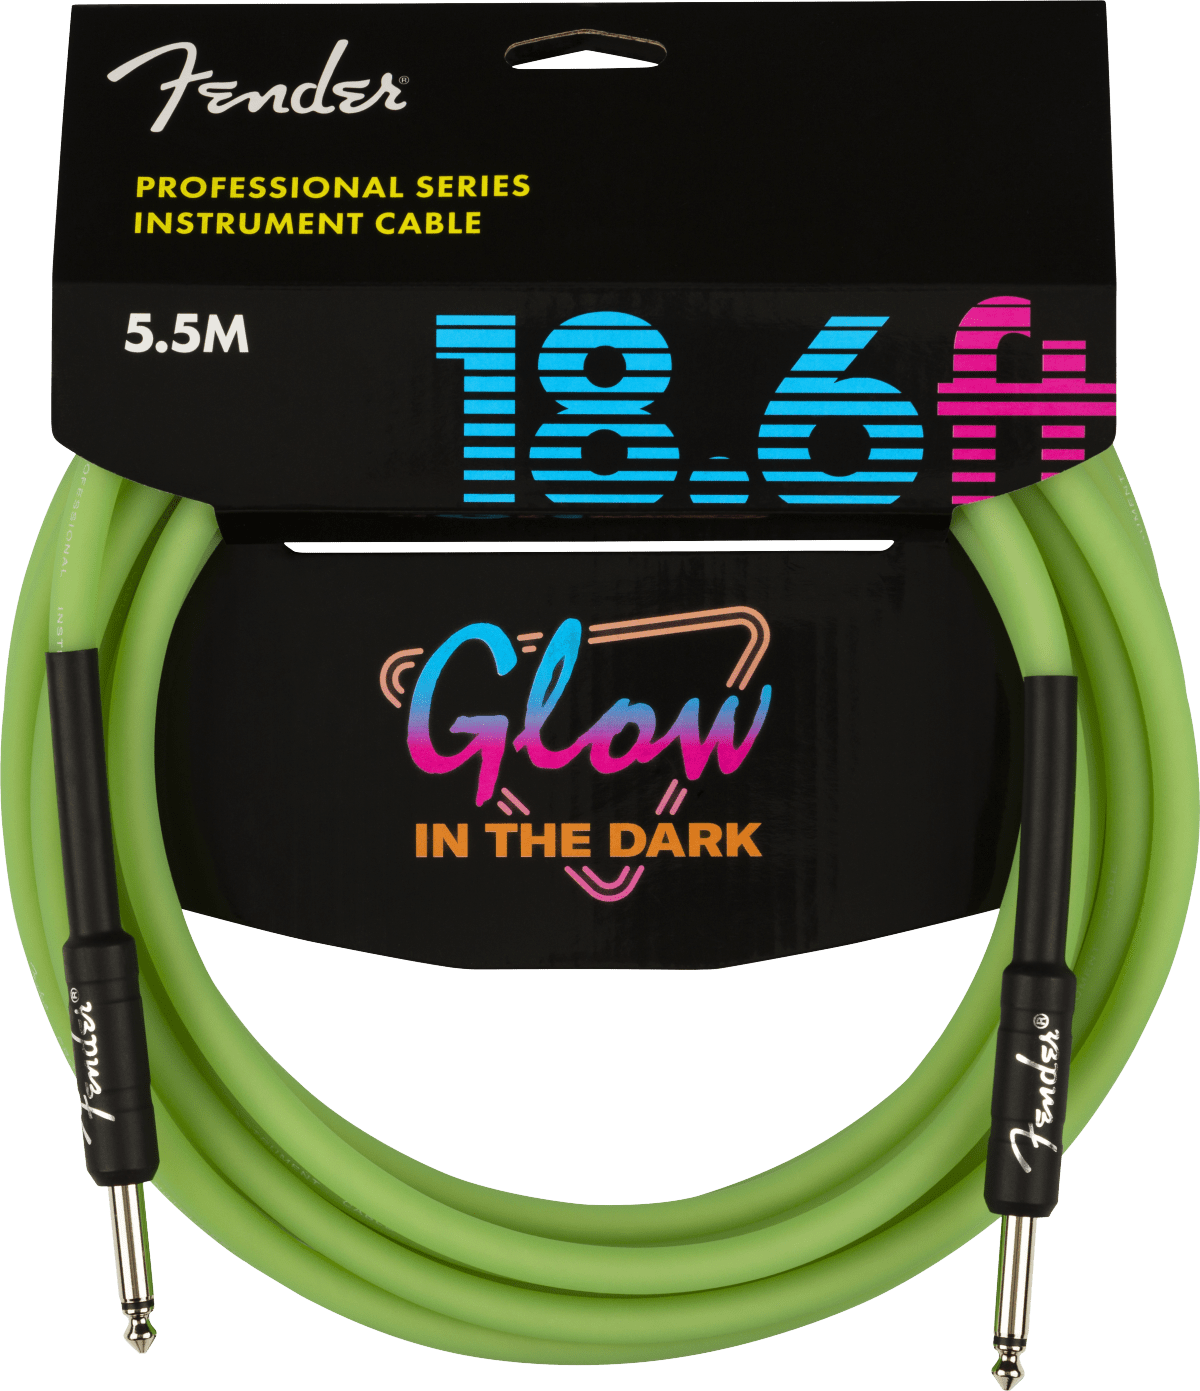 Professional Glow in the Dark Cable, Green, 18.6' Fender Cable de Instrumento